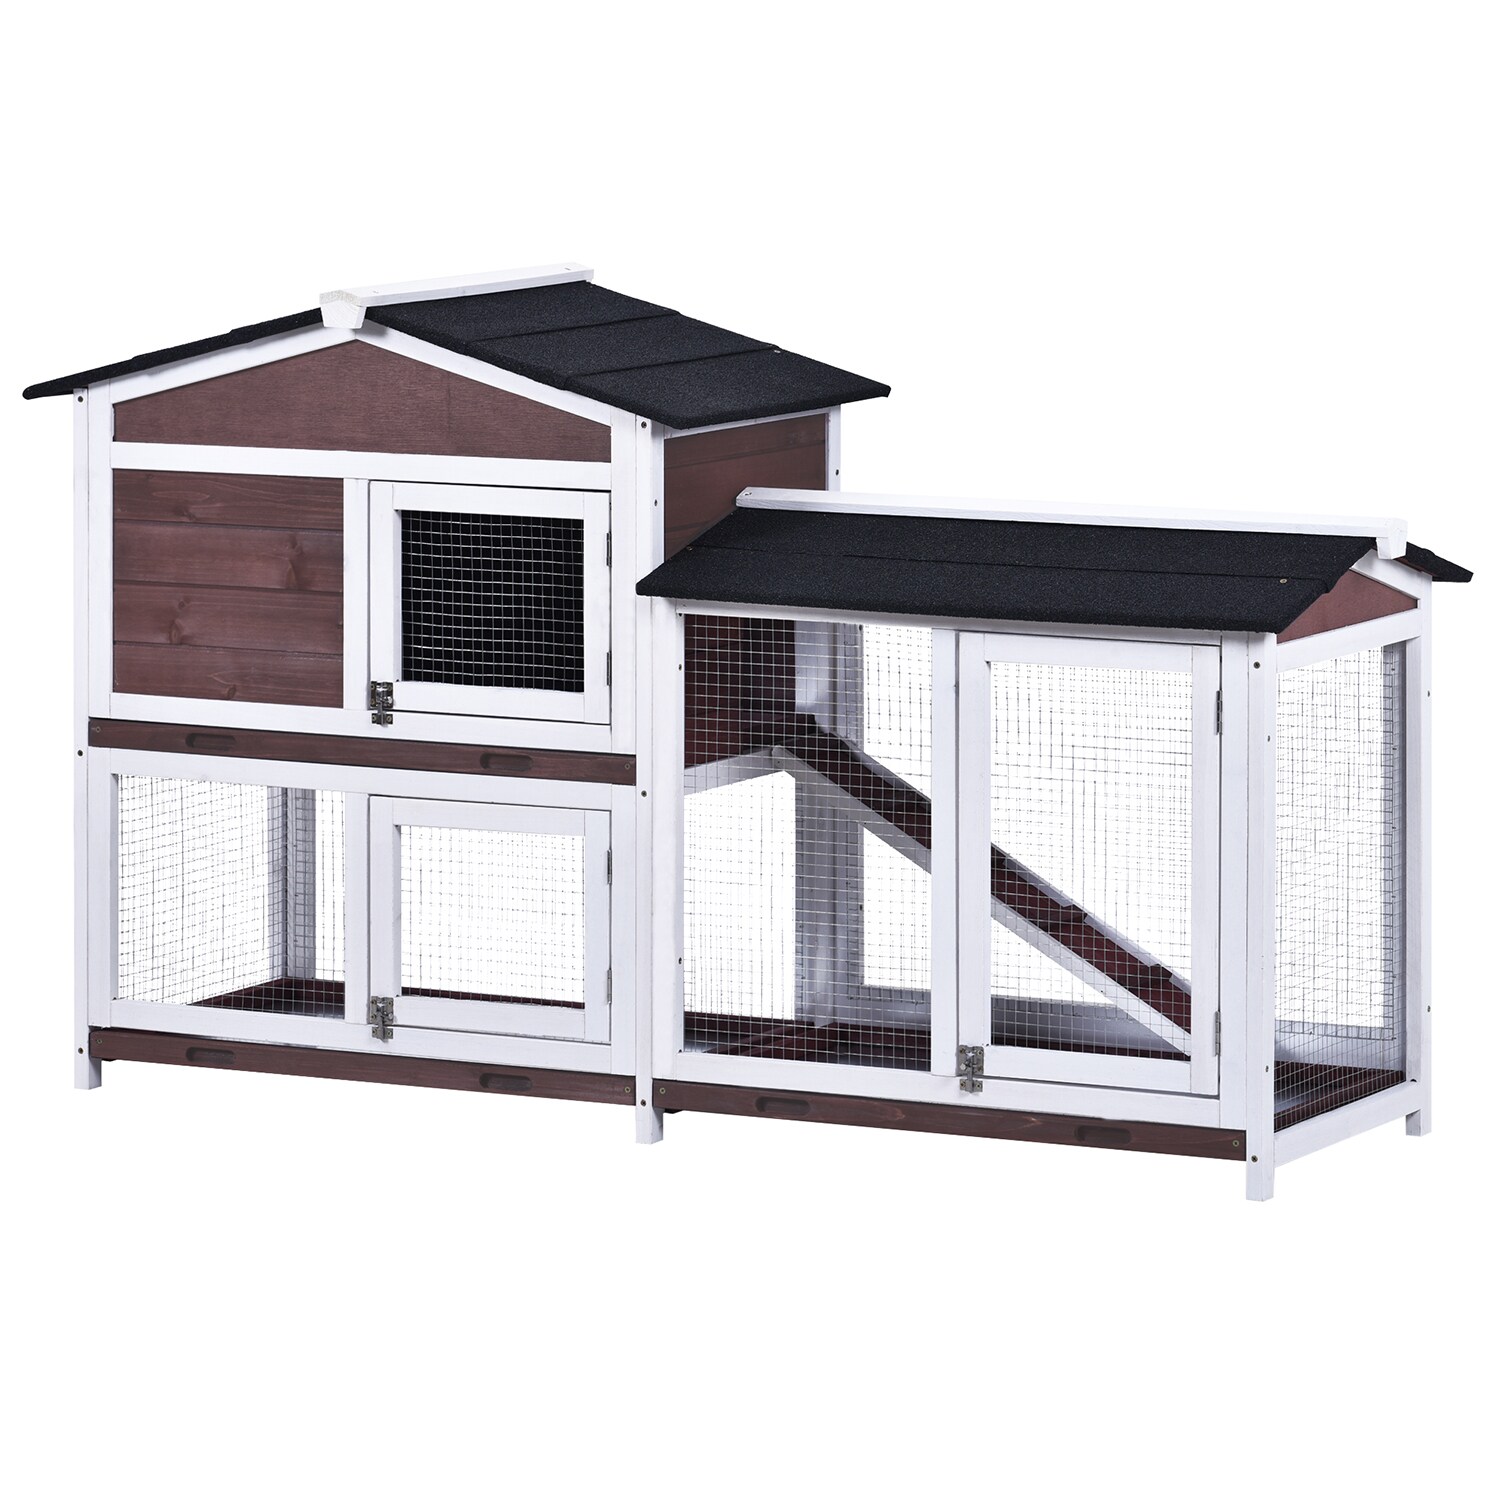 Fir Wooden Rabbit Hutch Chicken Coop Cage Small Animal Pet Dog House New US Ship 